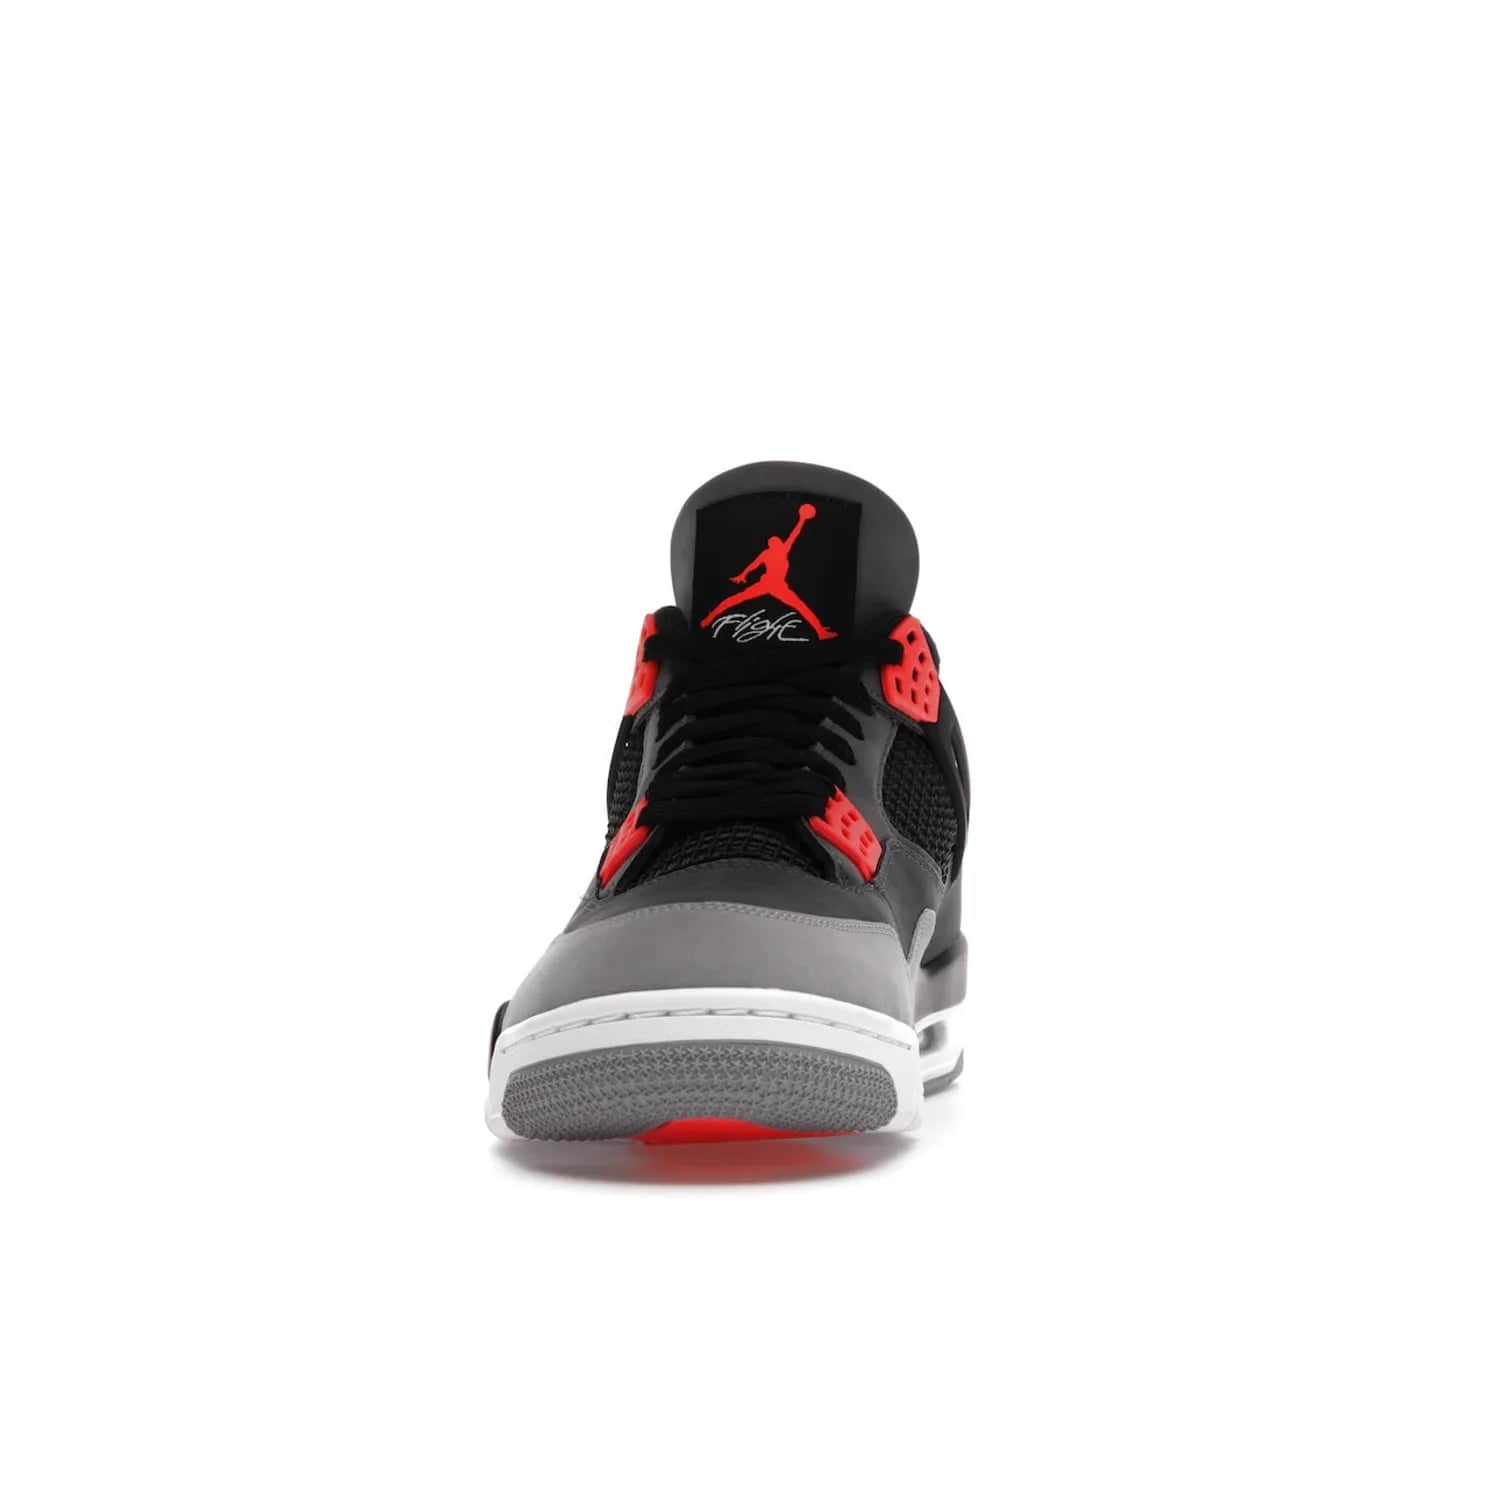 Jordan 4 Retro Infrared - Image 11 - Only at www.BallersClubKickz.com - Introducing the classic & timeless Air Jordan 4 Infrared. Durabuck upper, TPU mesh inserts, tech straps & heel tabs in dark grey and infrared accents. White sole with visible Air units. Out June 15, 2022. Get your pair now!